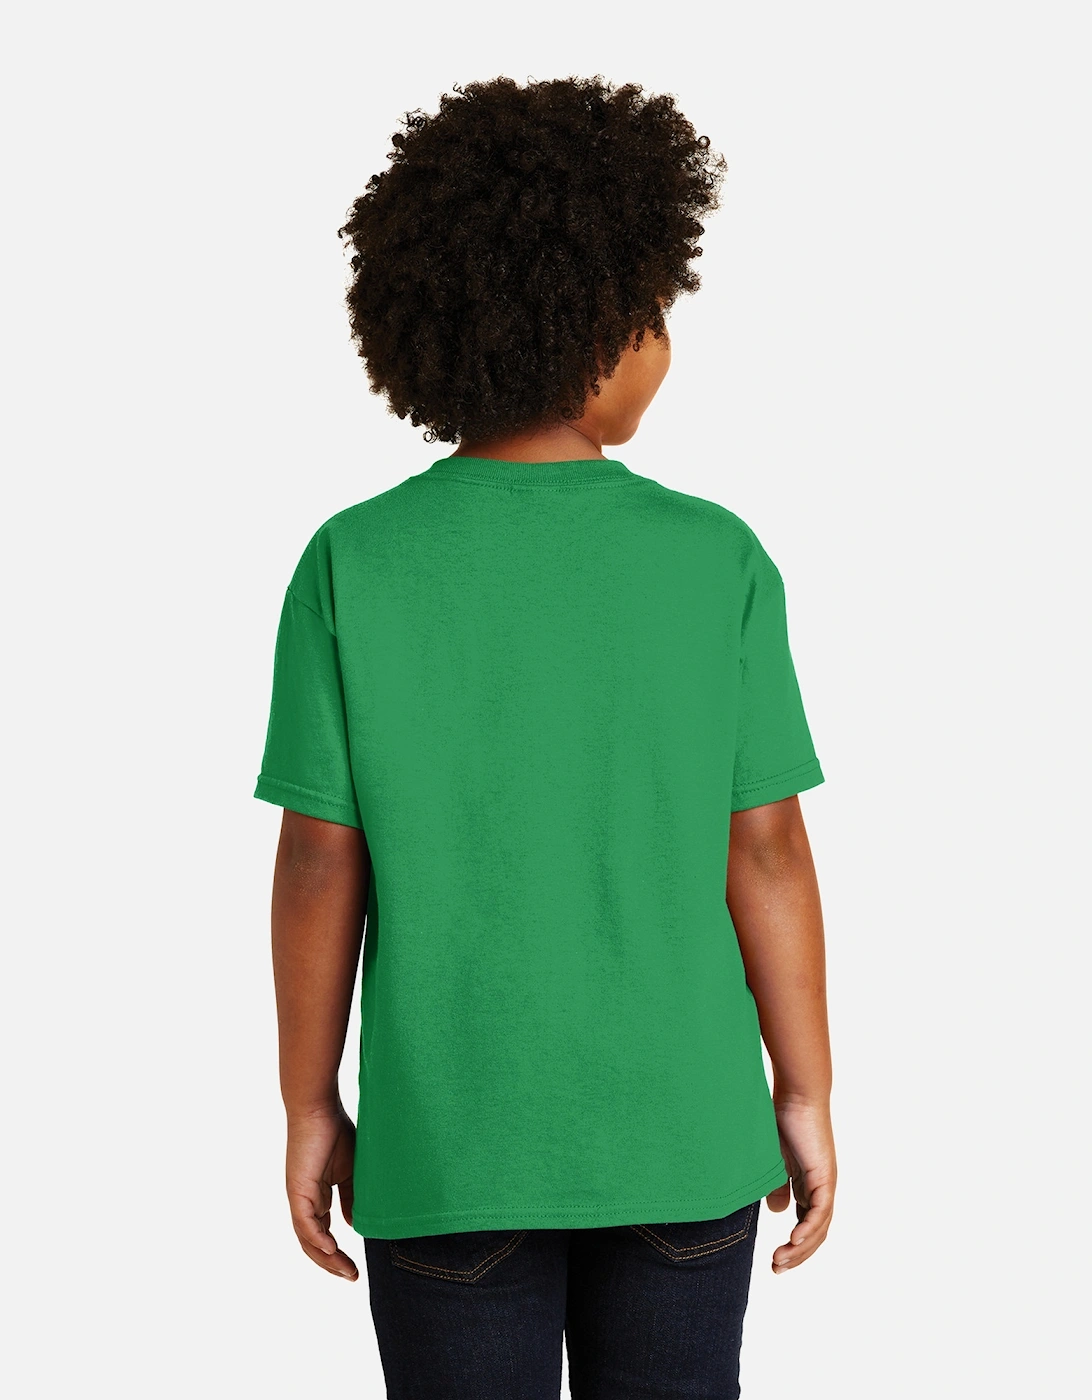 Childrens Unisex Heavy Cotton T-Shirt (Pack Of 2)